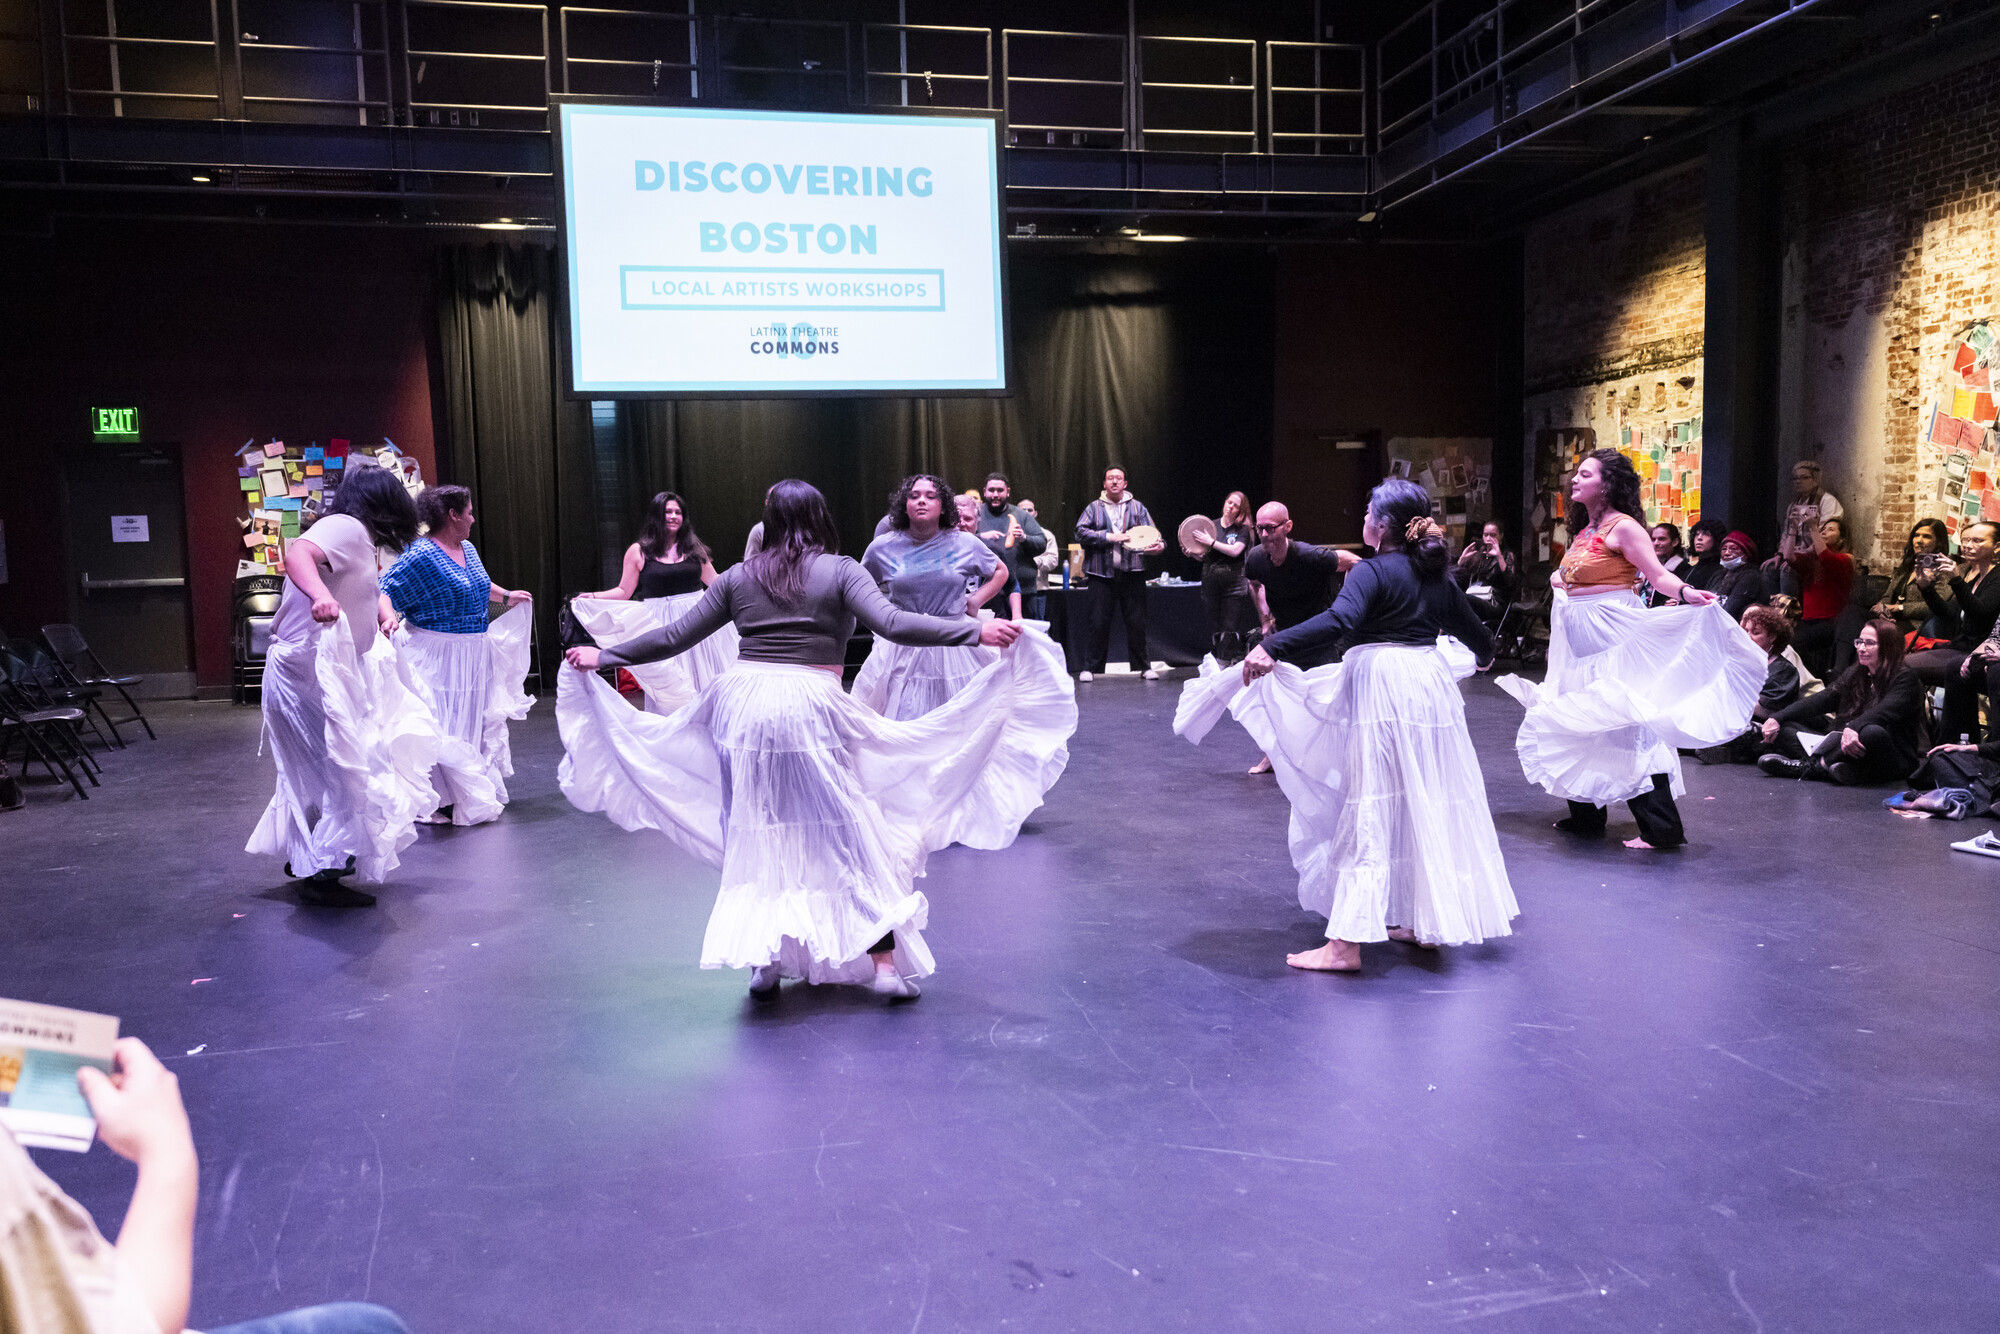 Participants in white skirts dance in a circle.